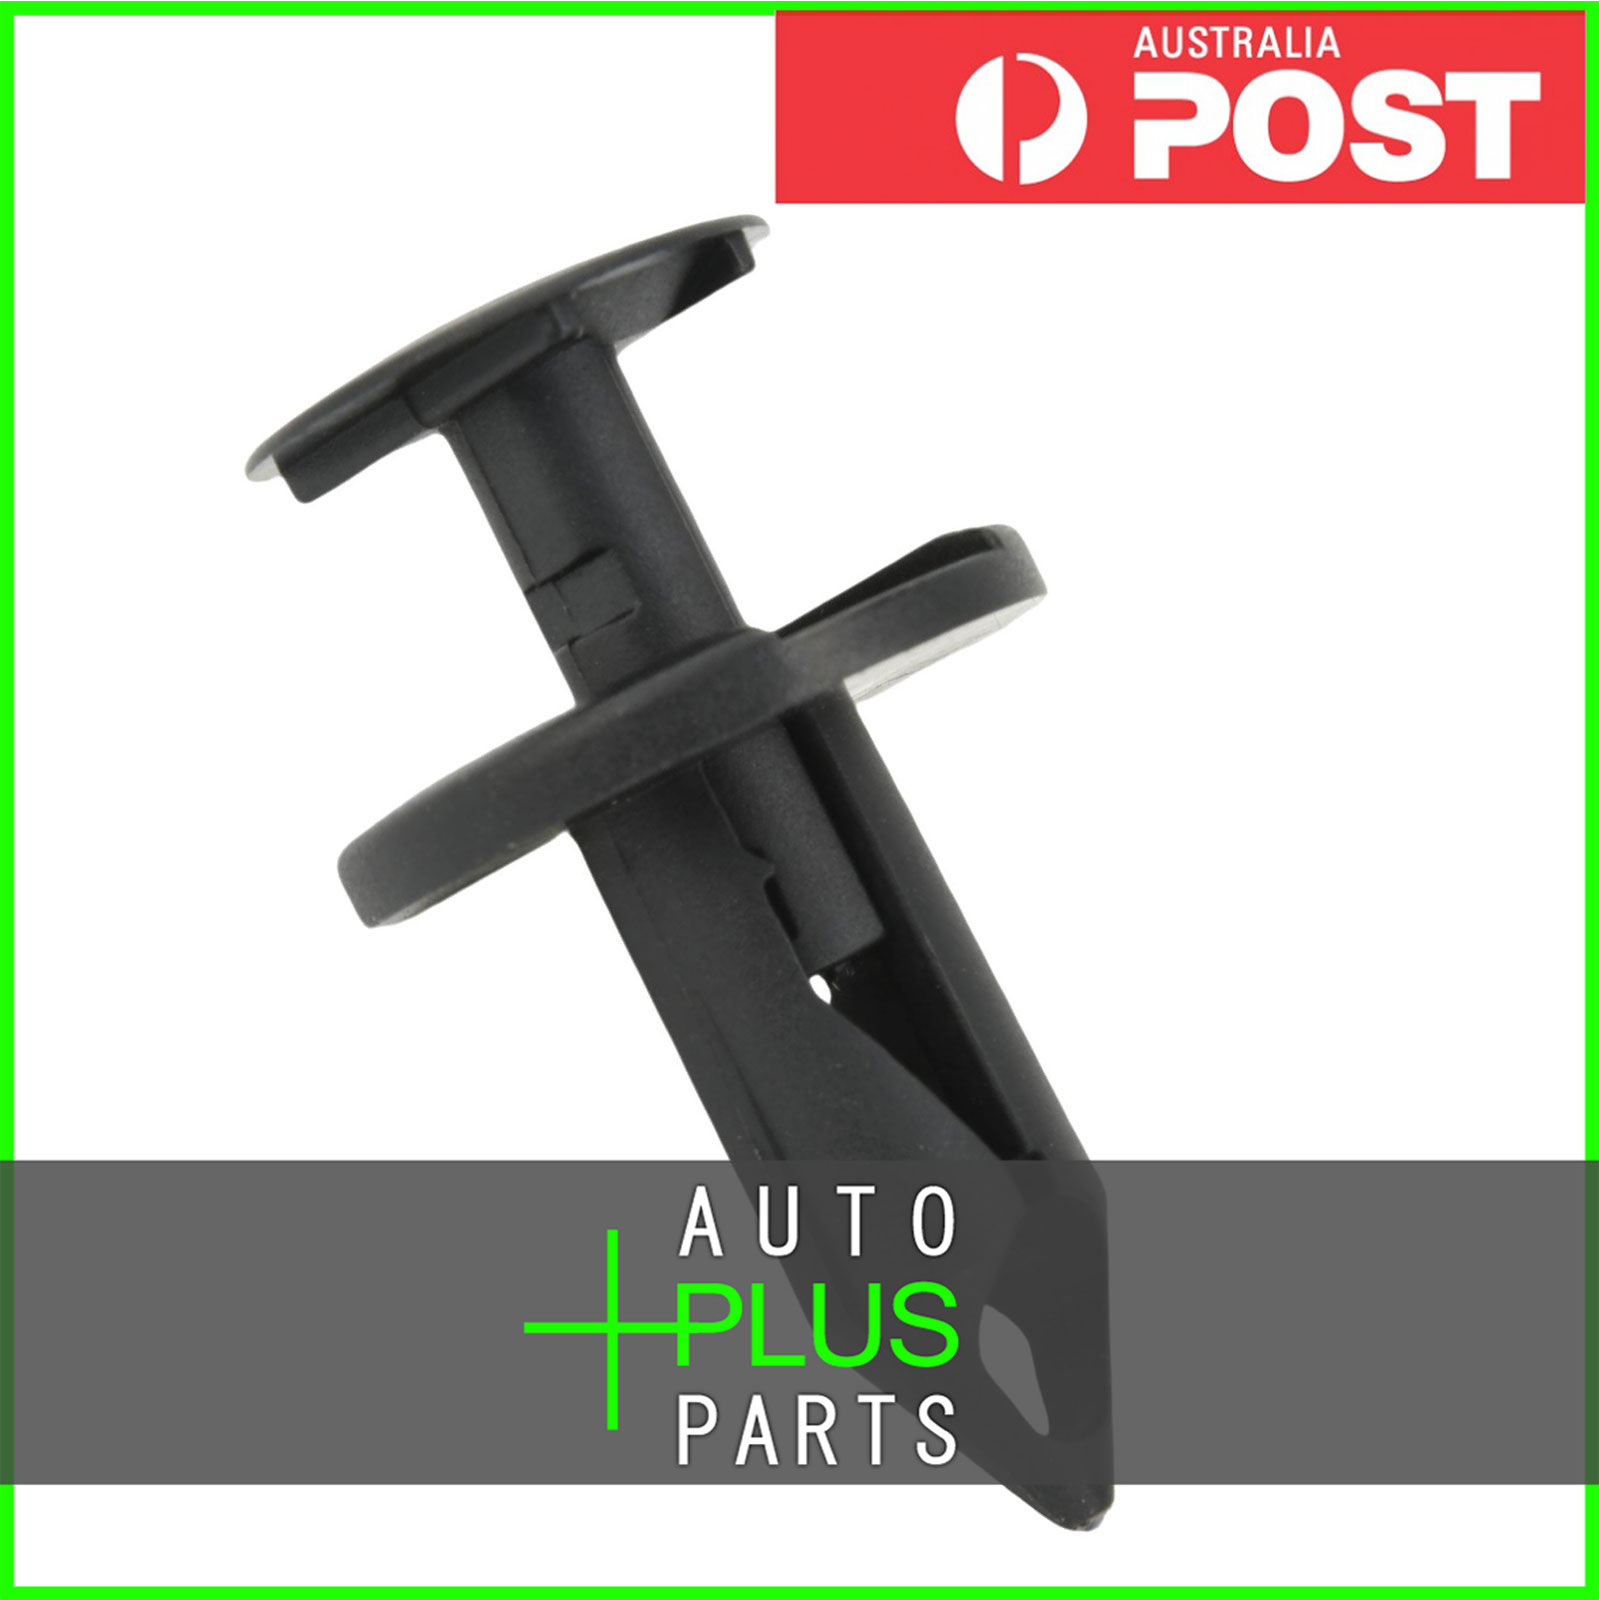 Fits GMC SIERRA 2500HD REGULAR CAB - 03 BODY (2WD),(4WD) RETAINER CLIP Product Photo